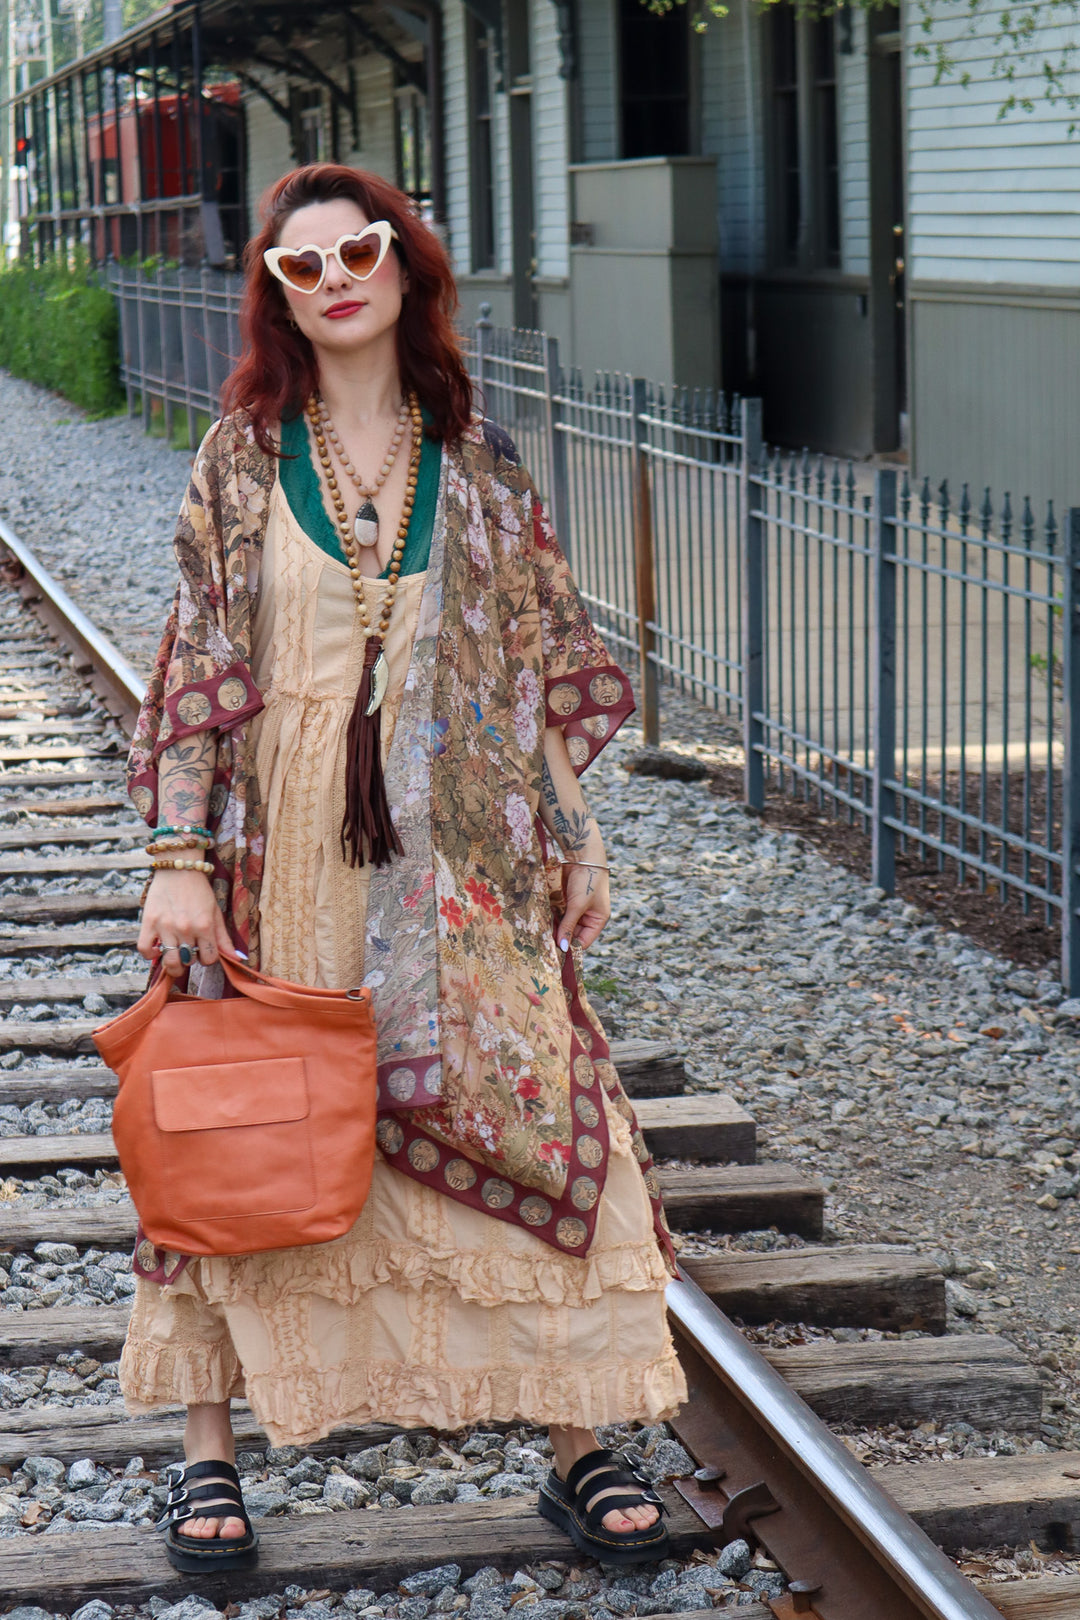 Bianca Handcrafted Leather Tote/Crossbody Bags in Burnt Orange